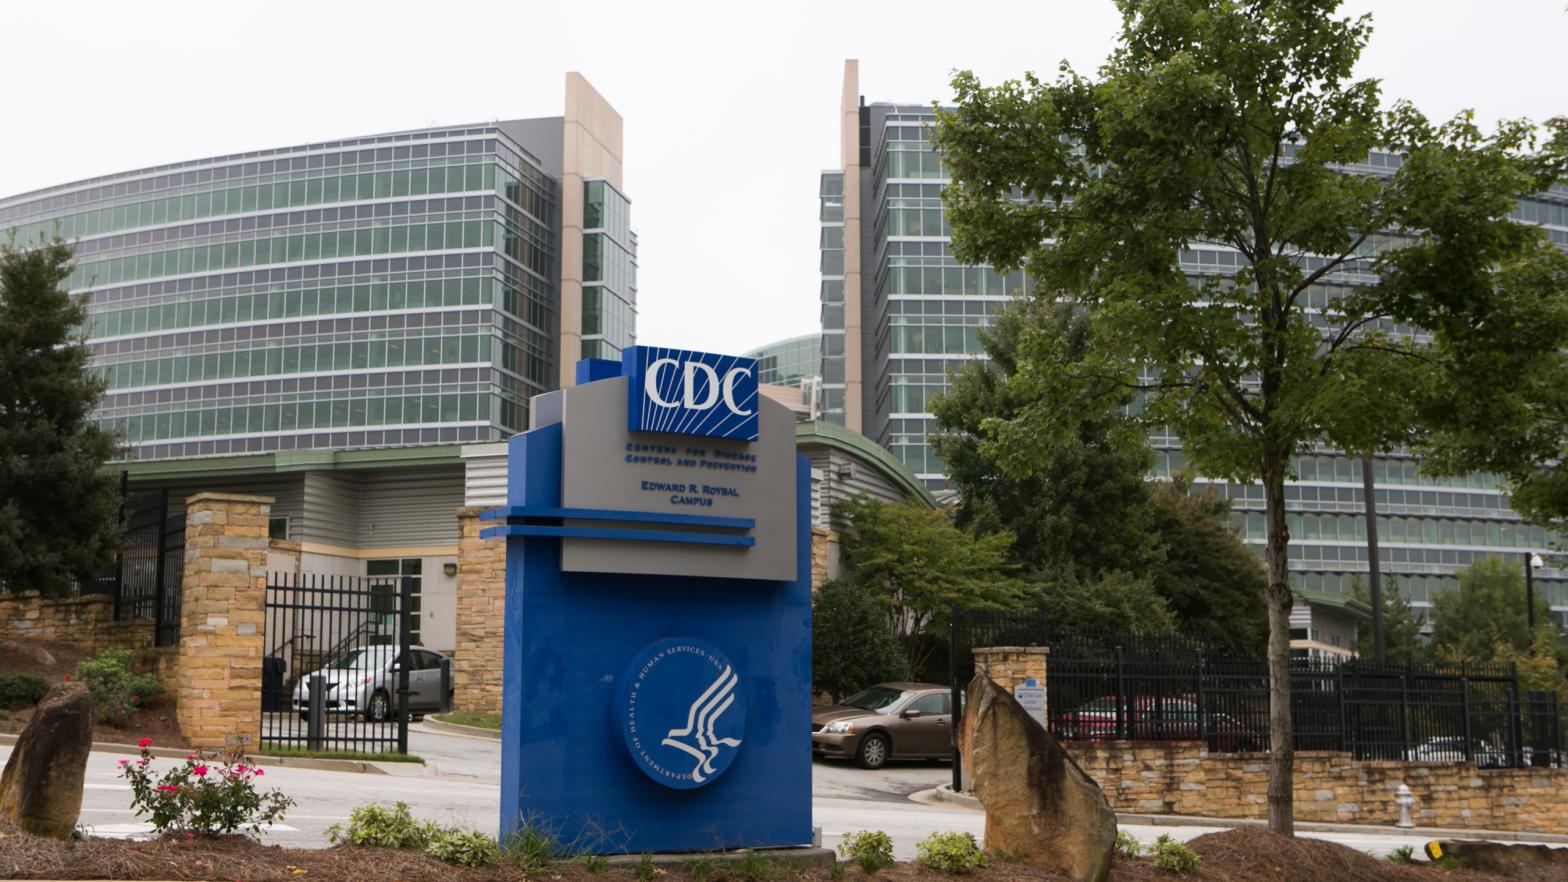 The Centre for Disease Control and Prevention (CDC) headquarters in Atlanta, Georgia. (Photo: Jessica McGowan, Getty Images)